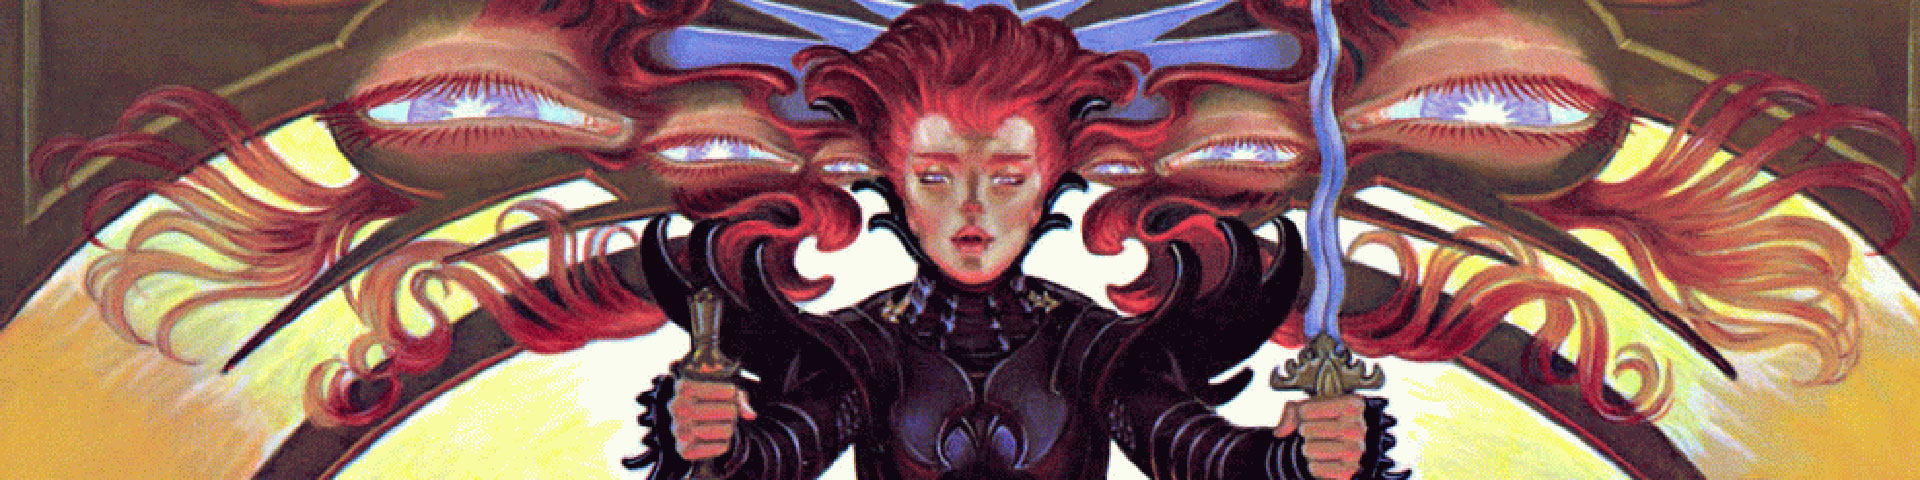 A close-up view of an Amberite from the Amber Diceless RPG cover.